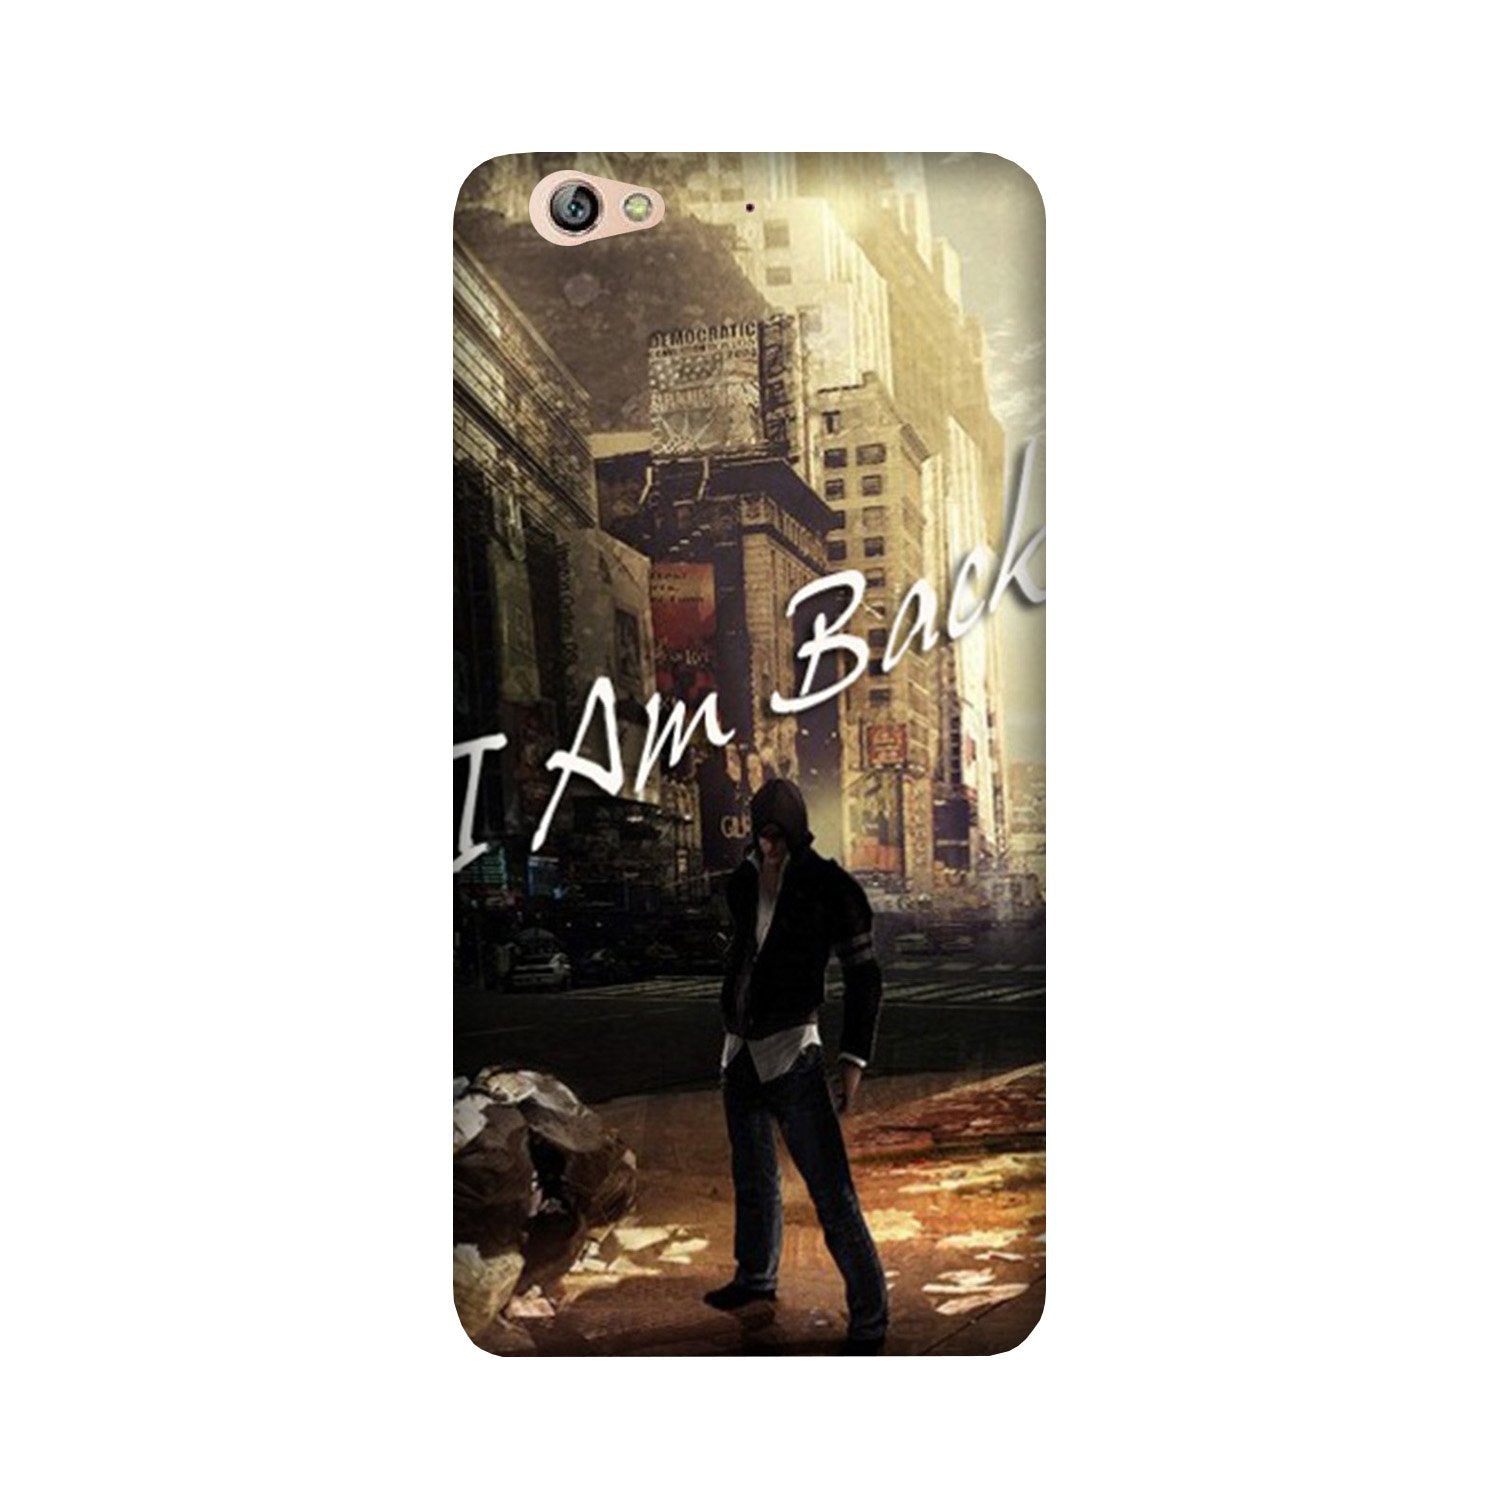 I am Back Case for Gionee S6 (Design No. 296)